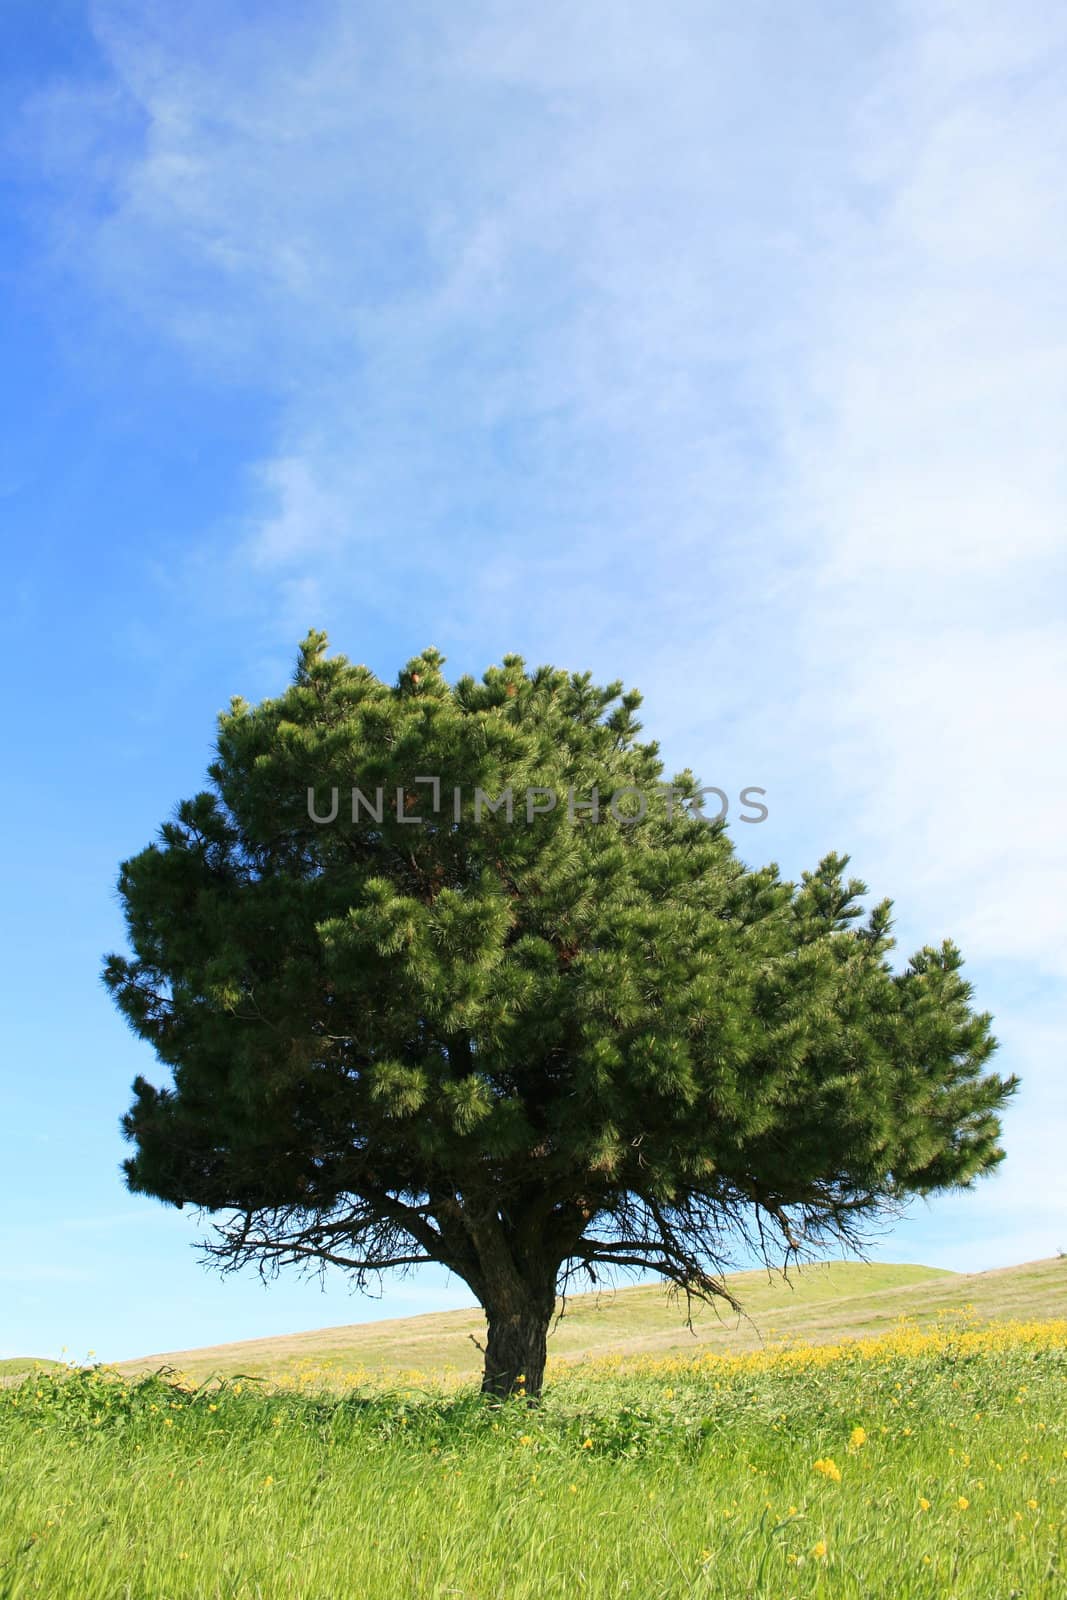 Single tree in a forest over blue sky.
